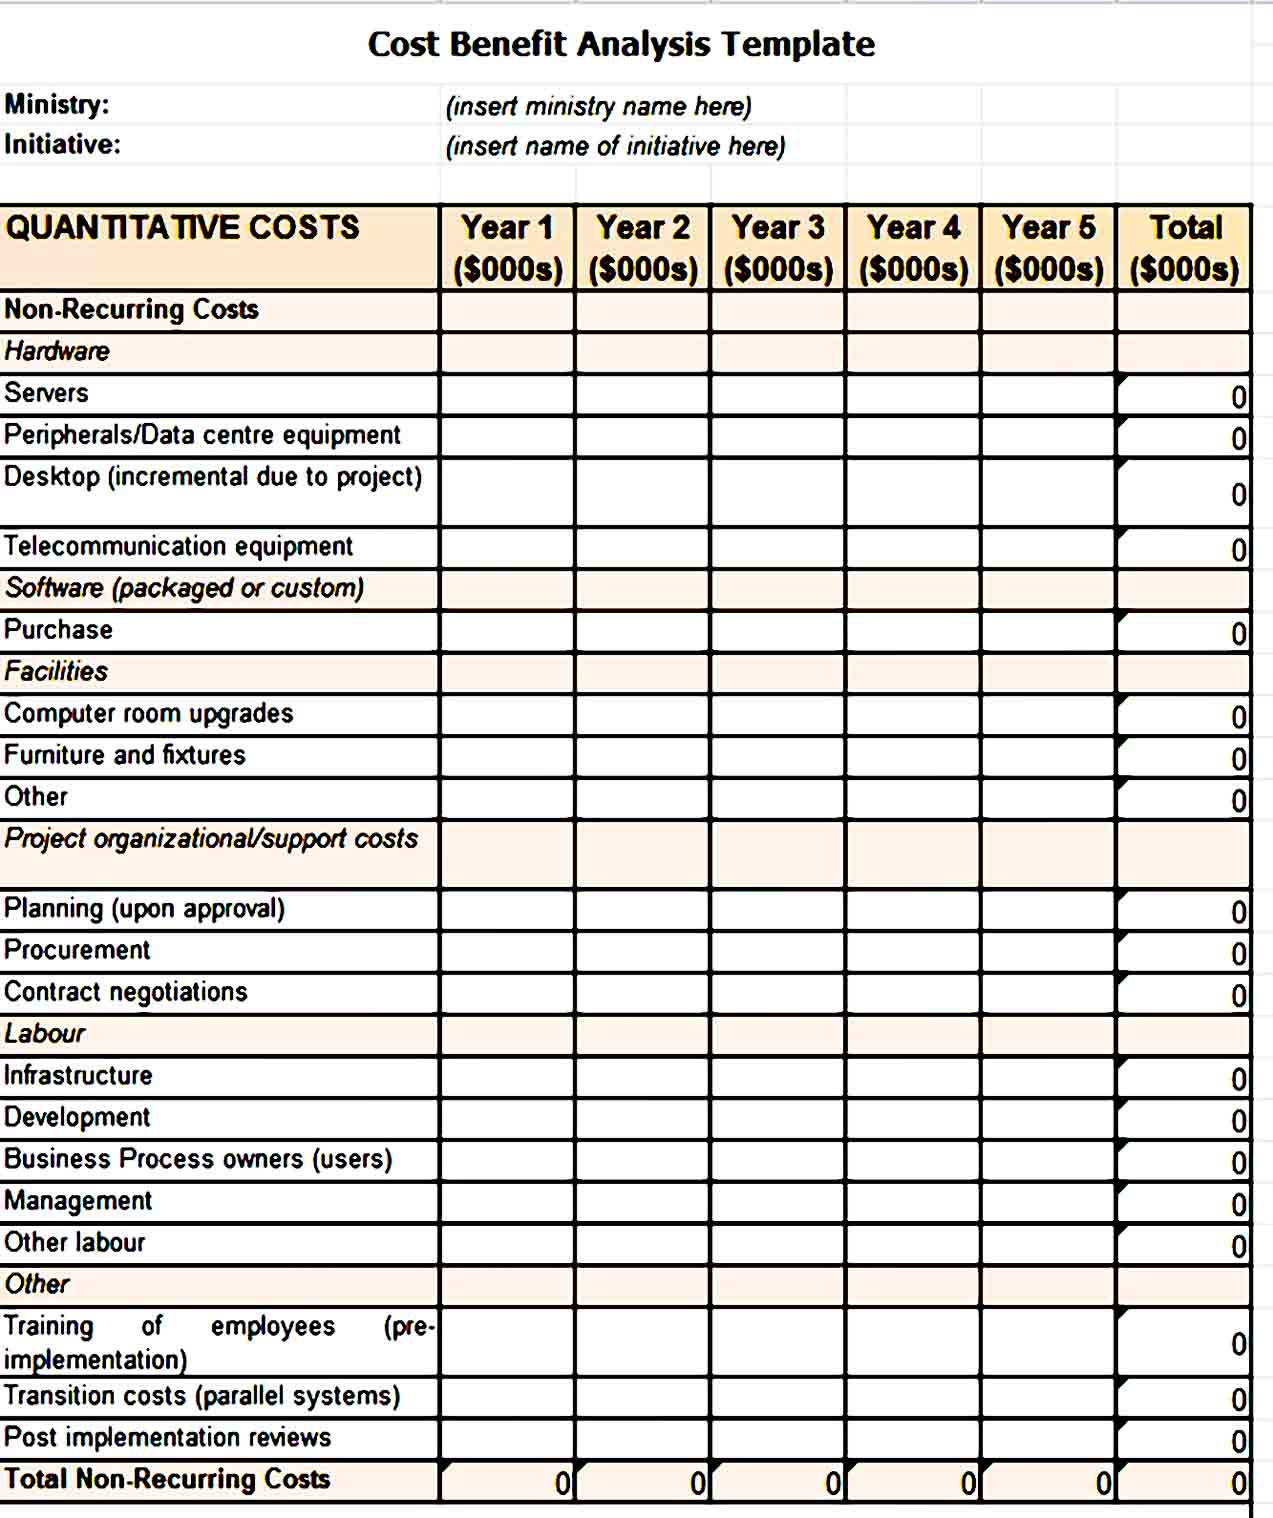 Cost Benefit Analysis Template 10